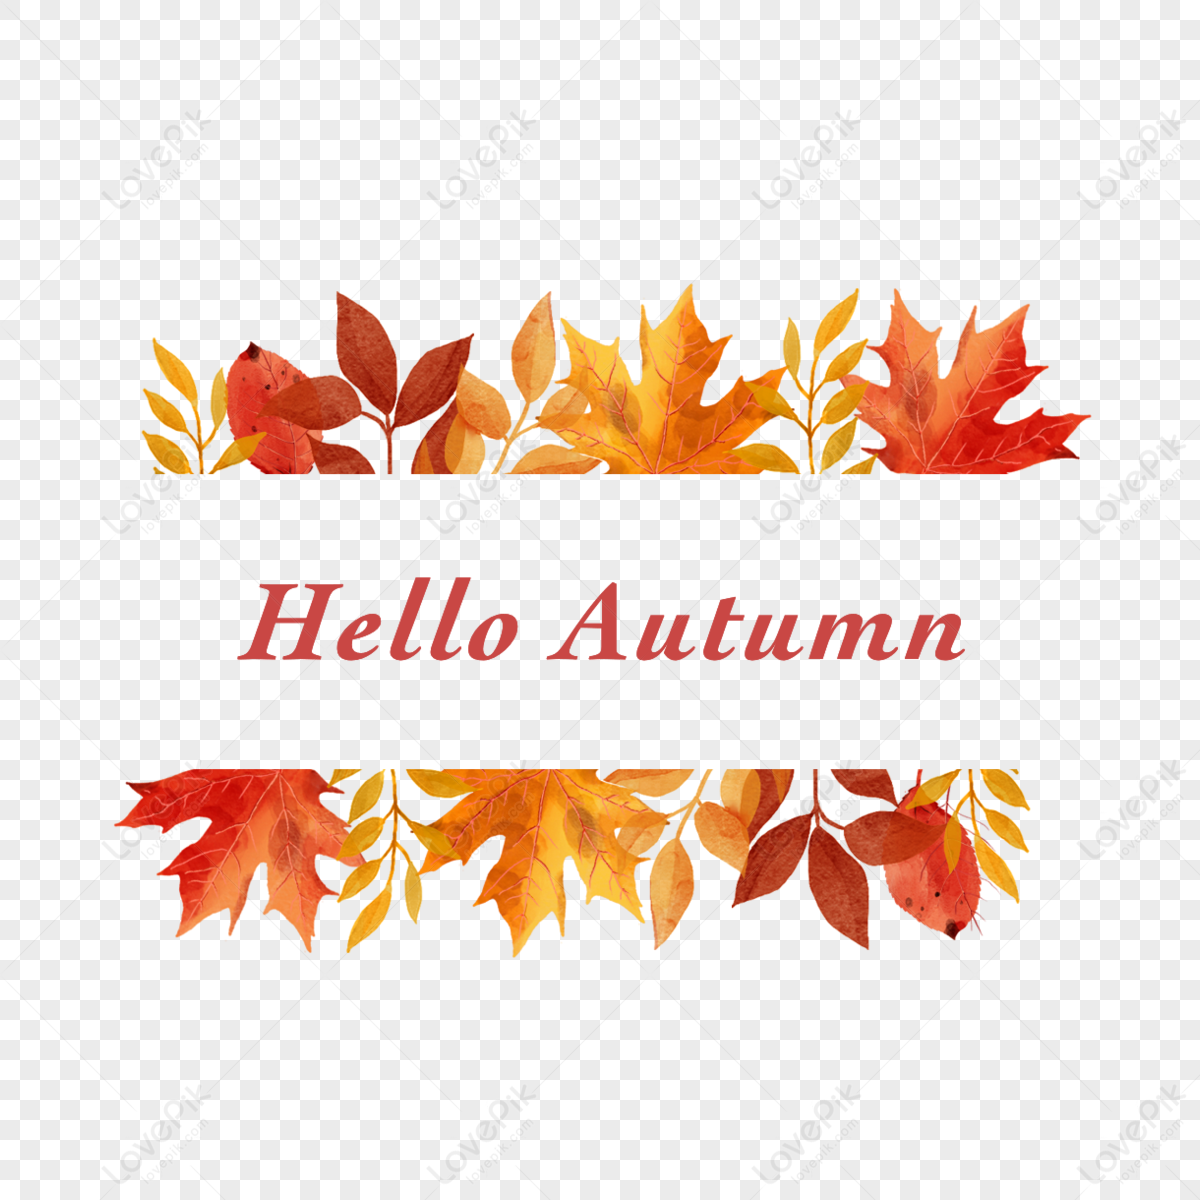 Hand painted original watercolor maple leaves autumn border,seasonal,holiday png transparent background